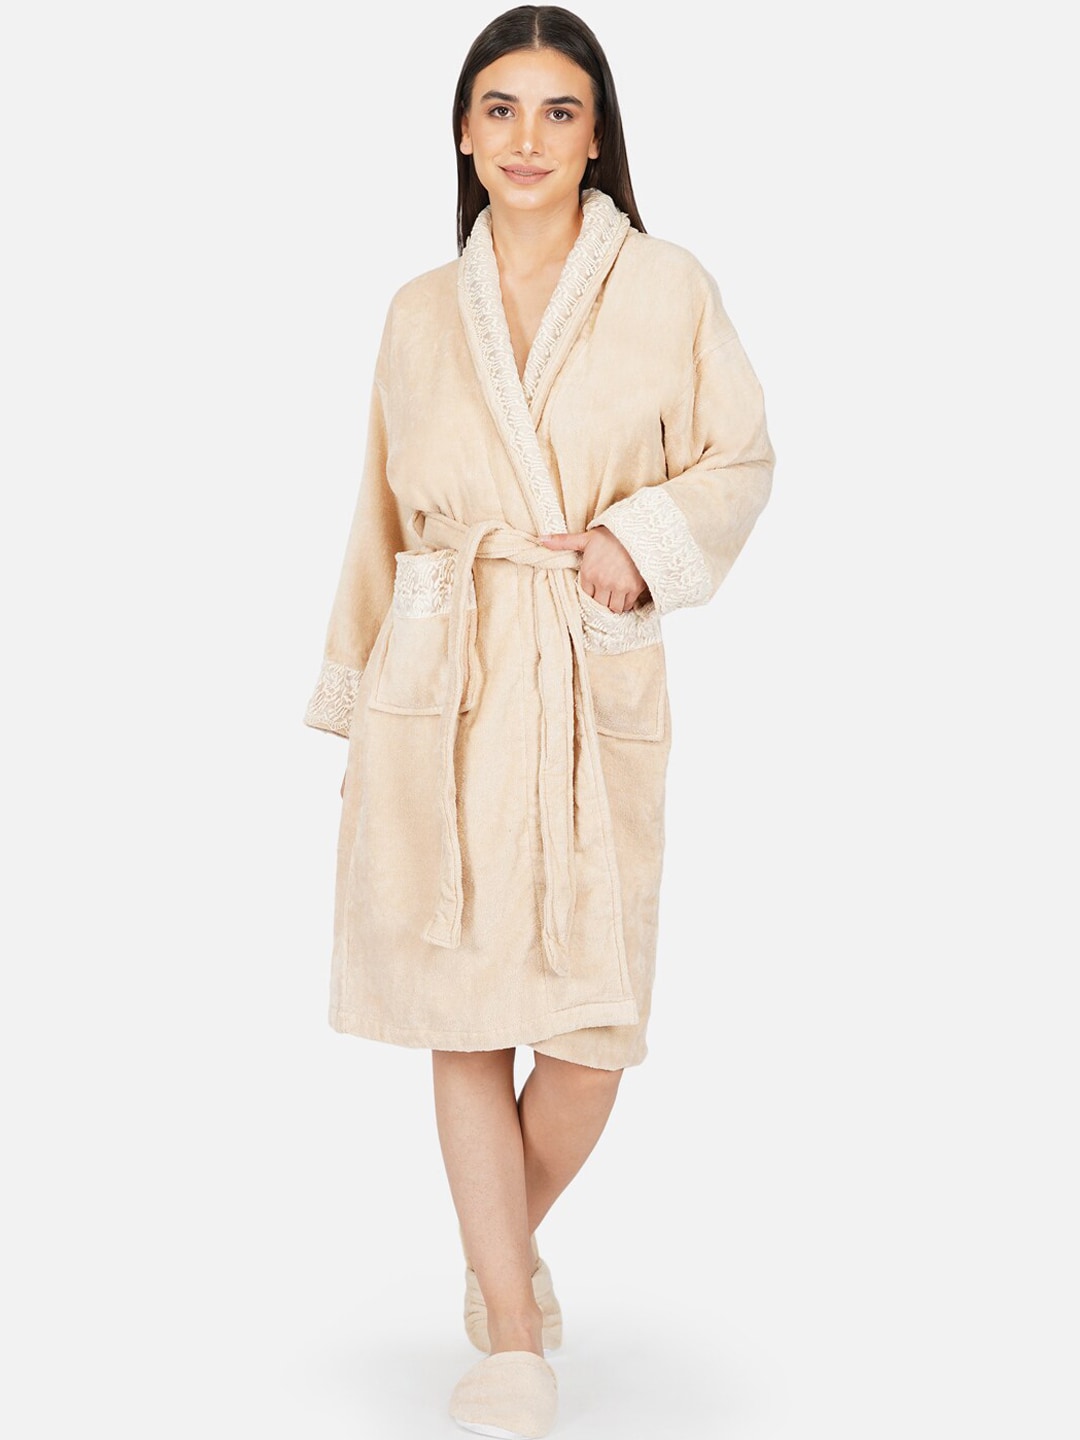 RANGOLI Women Beige Cotton 550 GSM Prima Dream Lace Large Bathrobe with Slippers Price in India